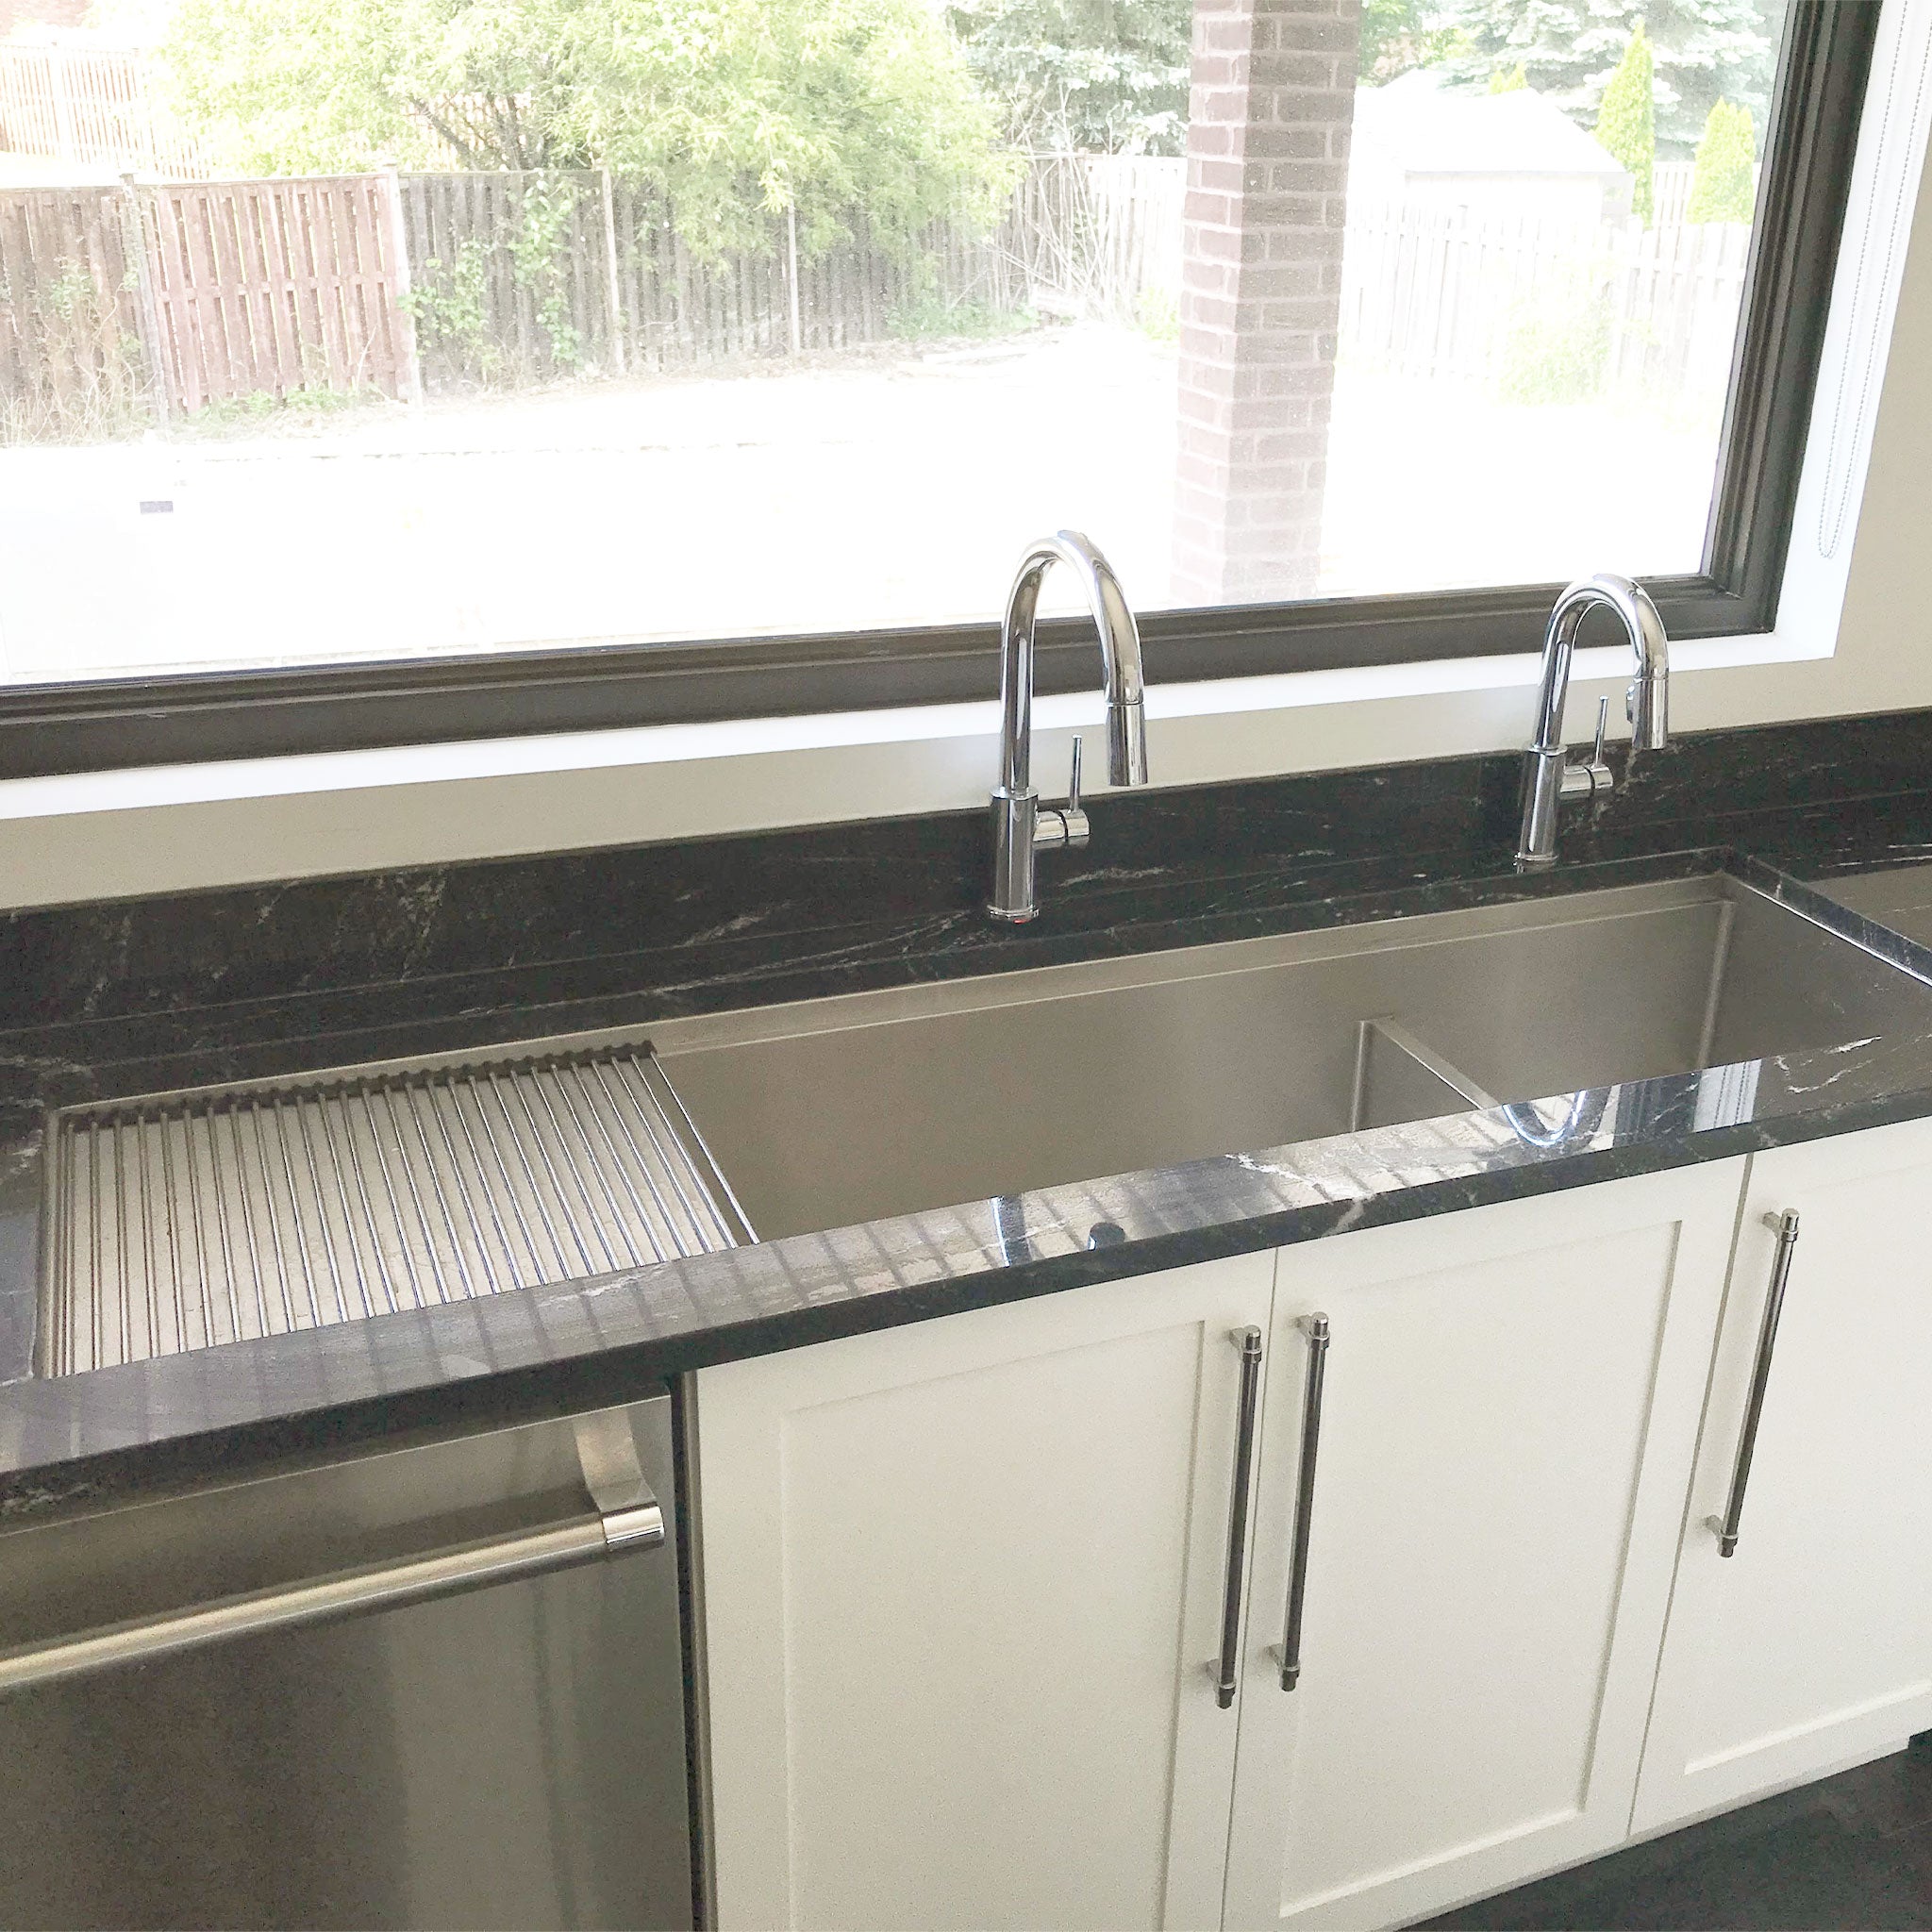 Oversized 68” stainless steel workstation kitchen sink with twin basins and a drainboard